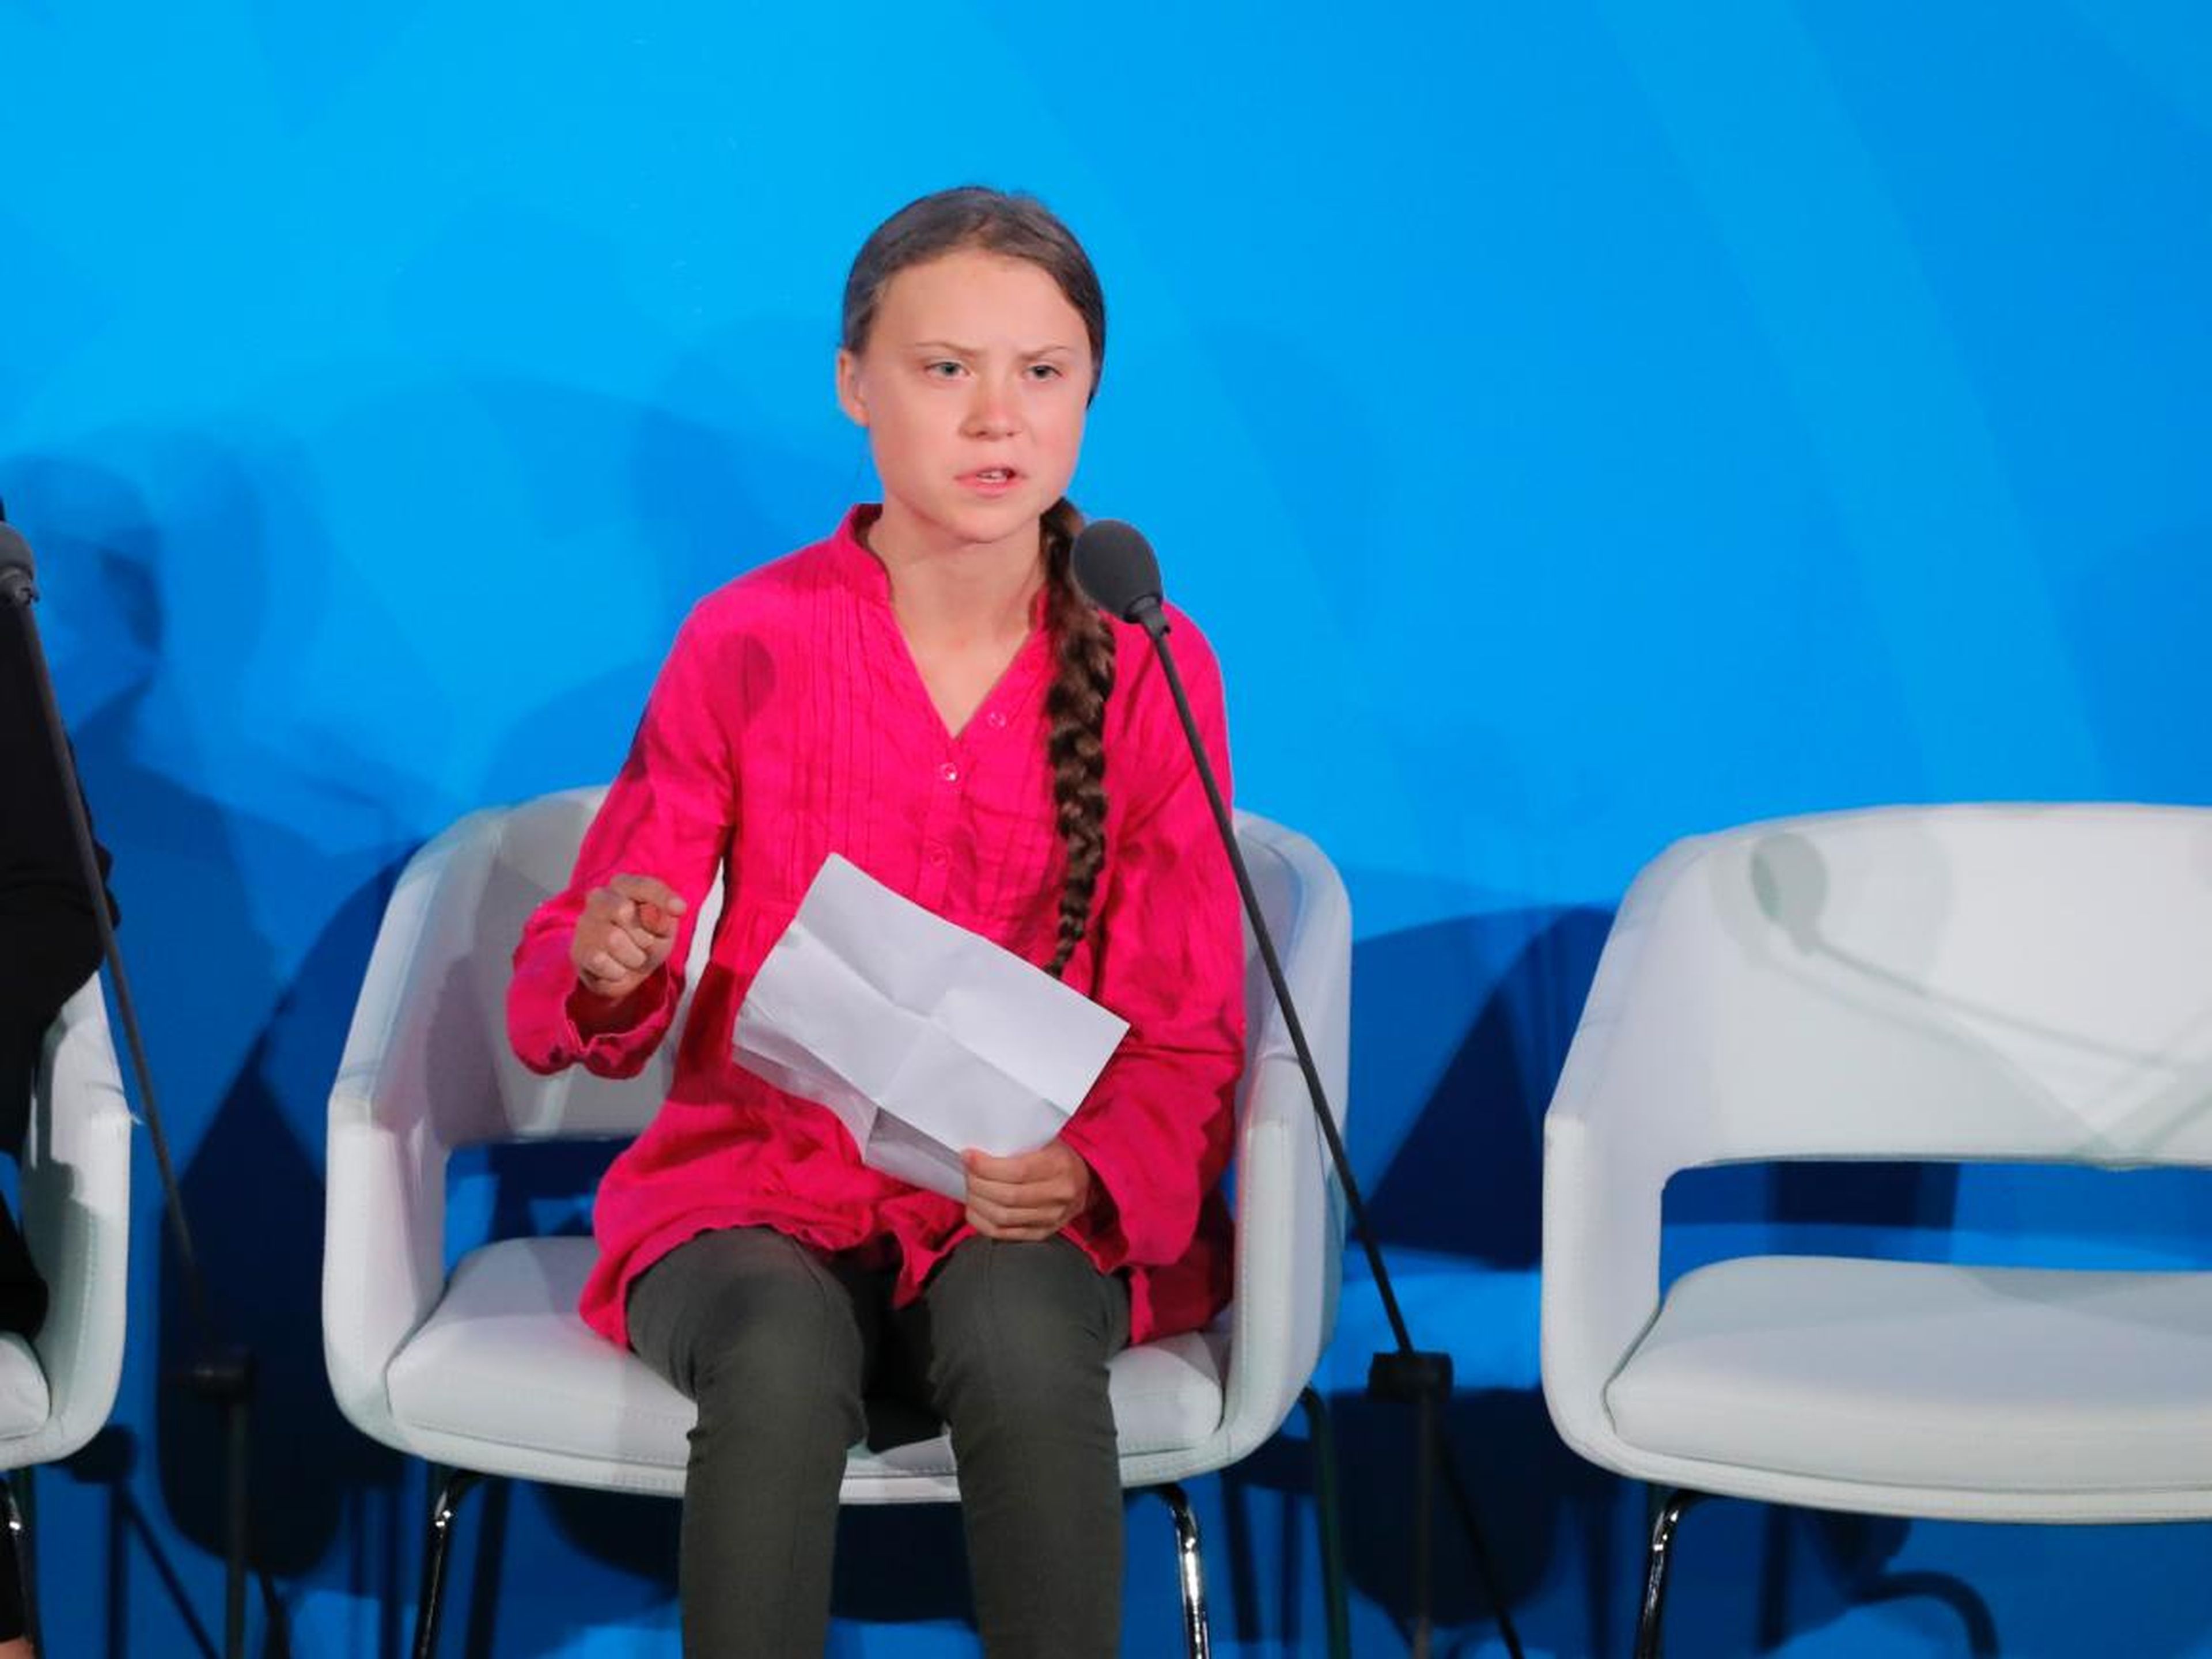 16-year-old Swedish climate activist Greta Thunberg speaks at the 2019 United Nations Climate Action Summit at UN headquarters in New York City, September 23, 2019.